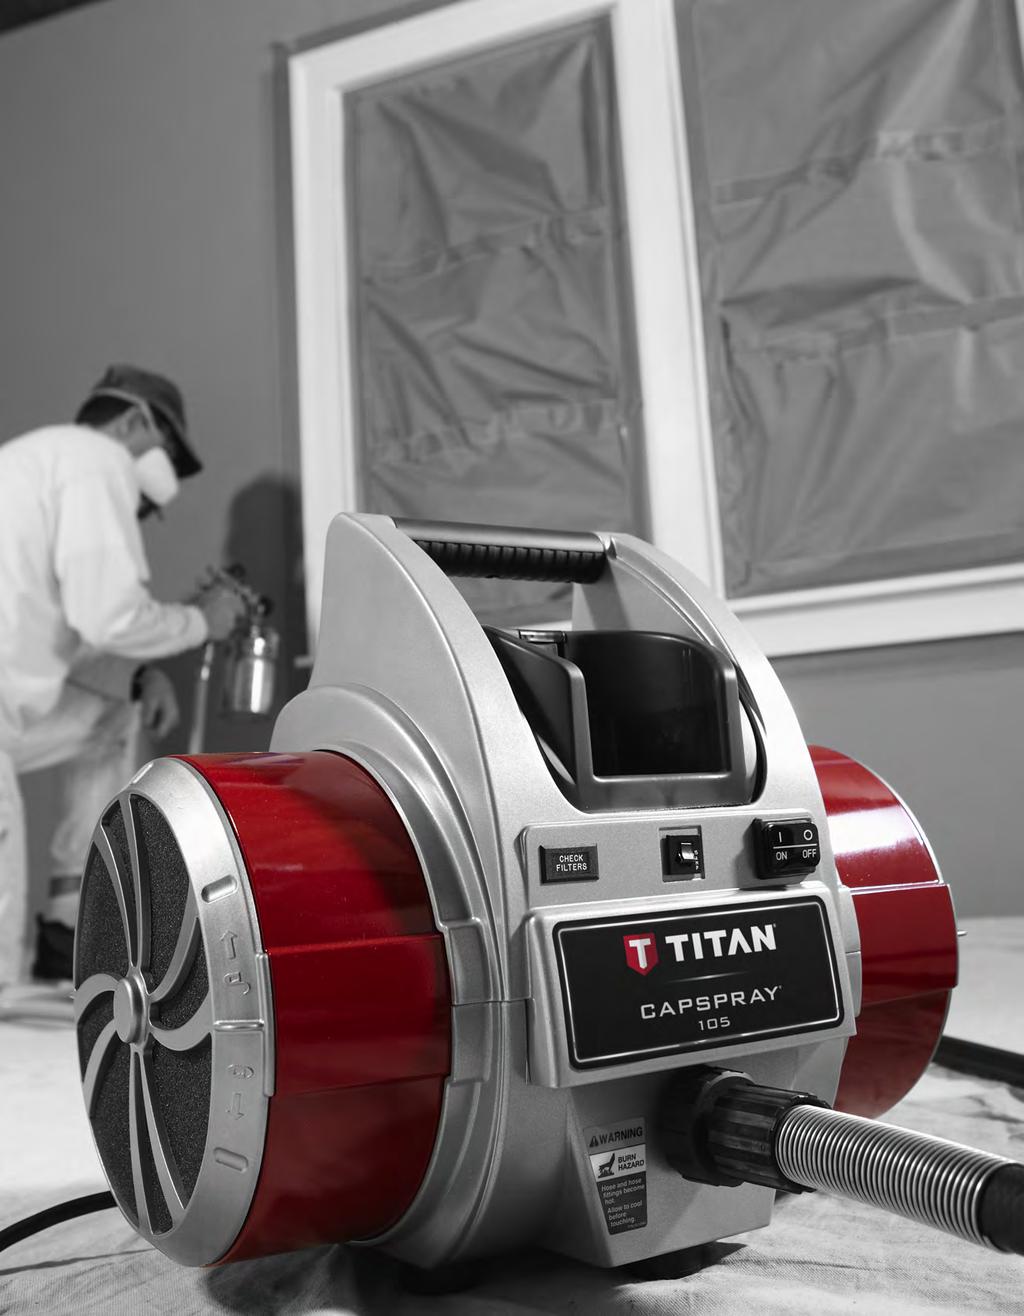 CAPSPRAY SERIES Woodworking, cabinetry and furniture finishing projects require the performance that only Titan Capspray can deliver.